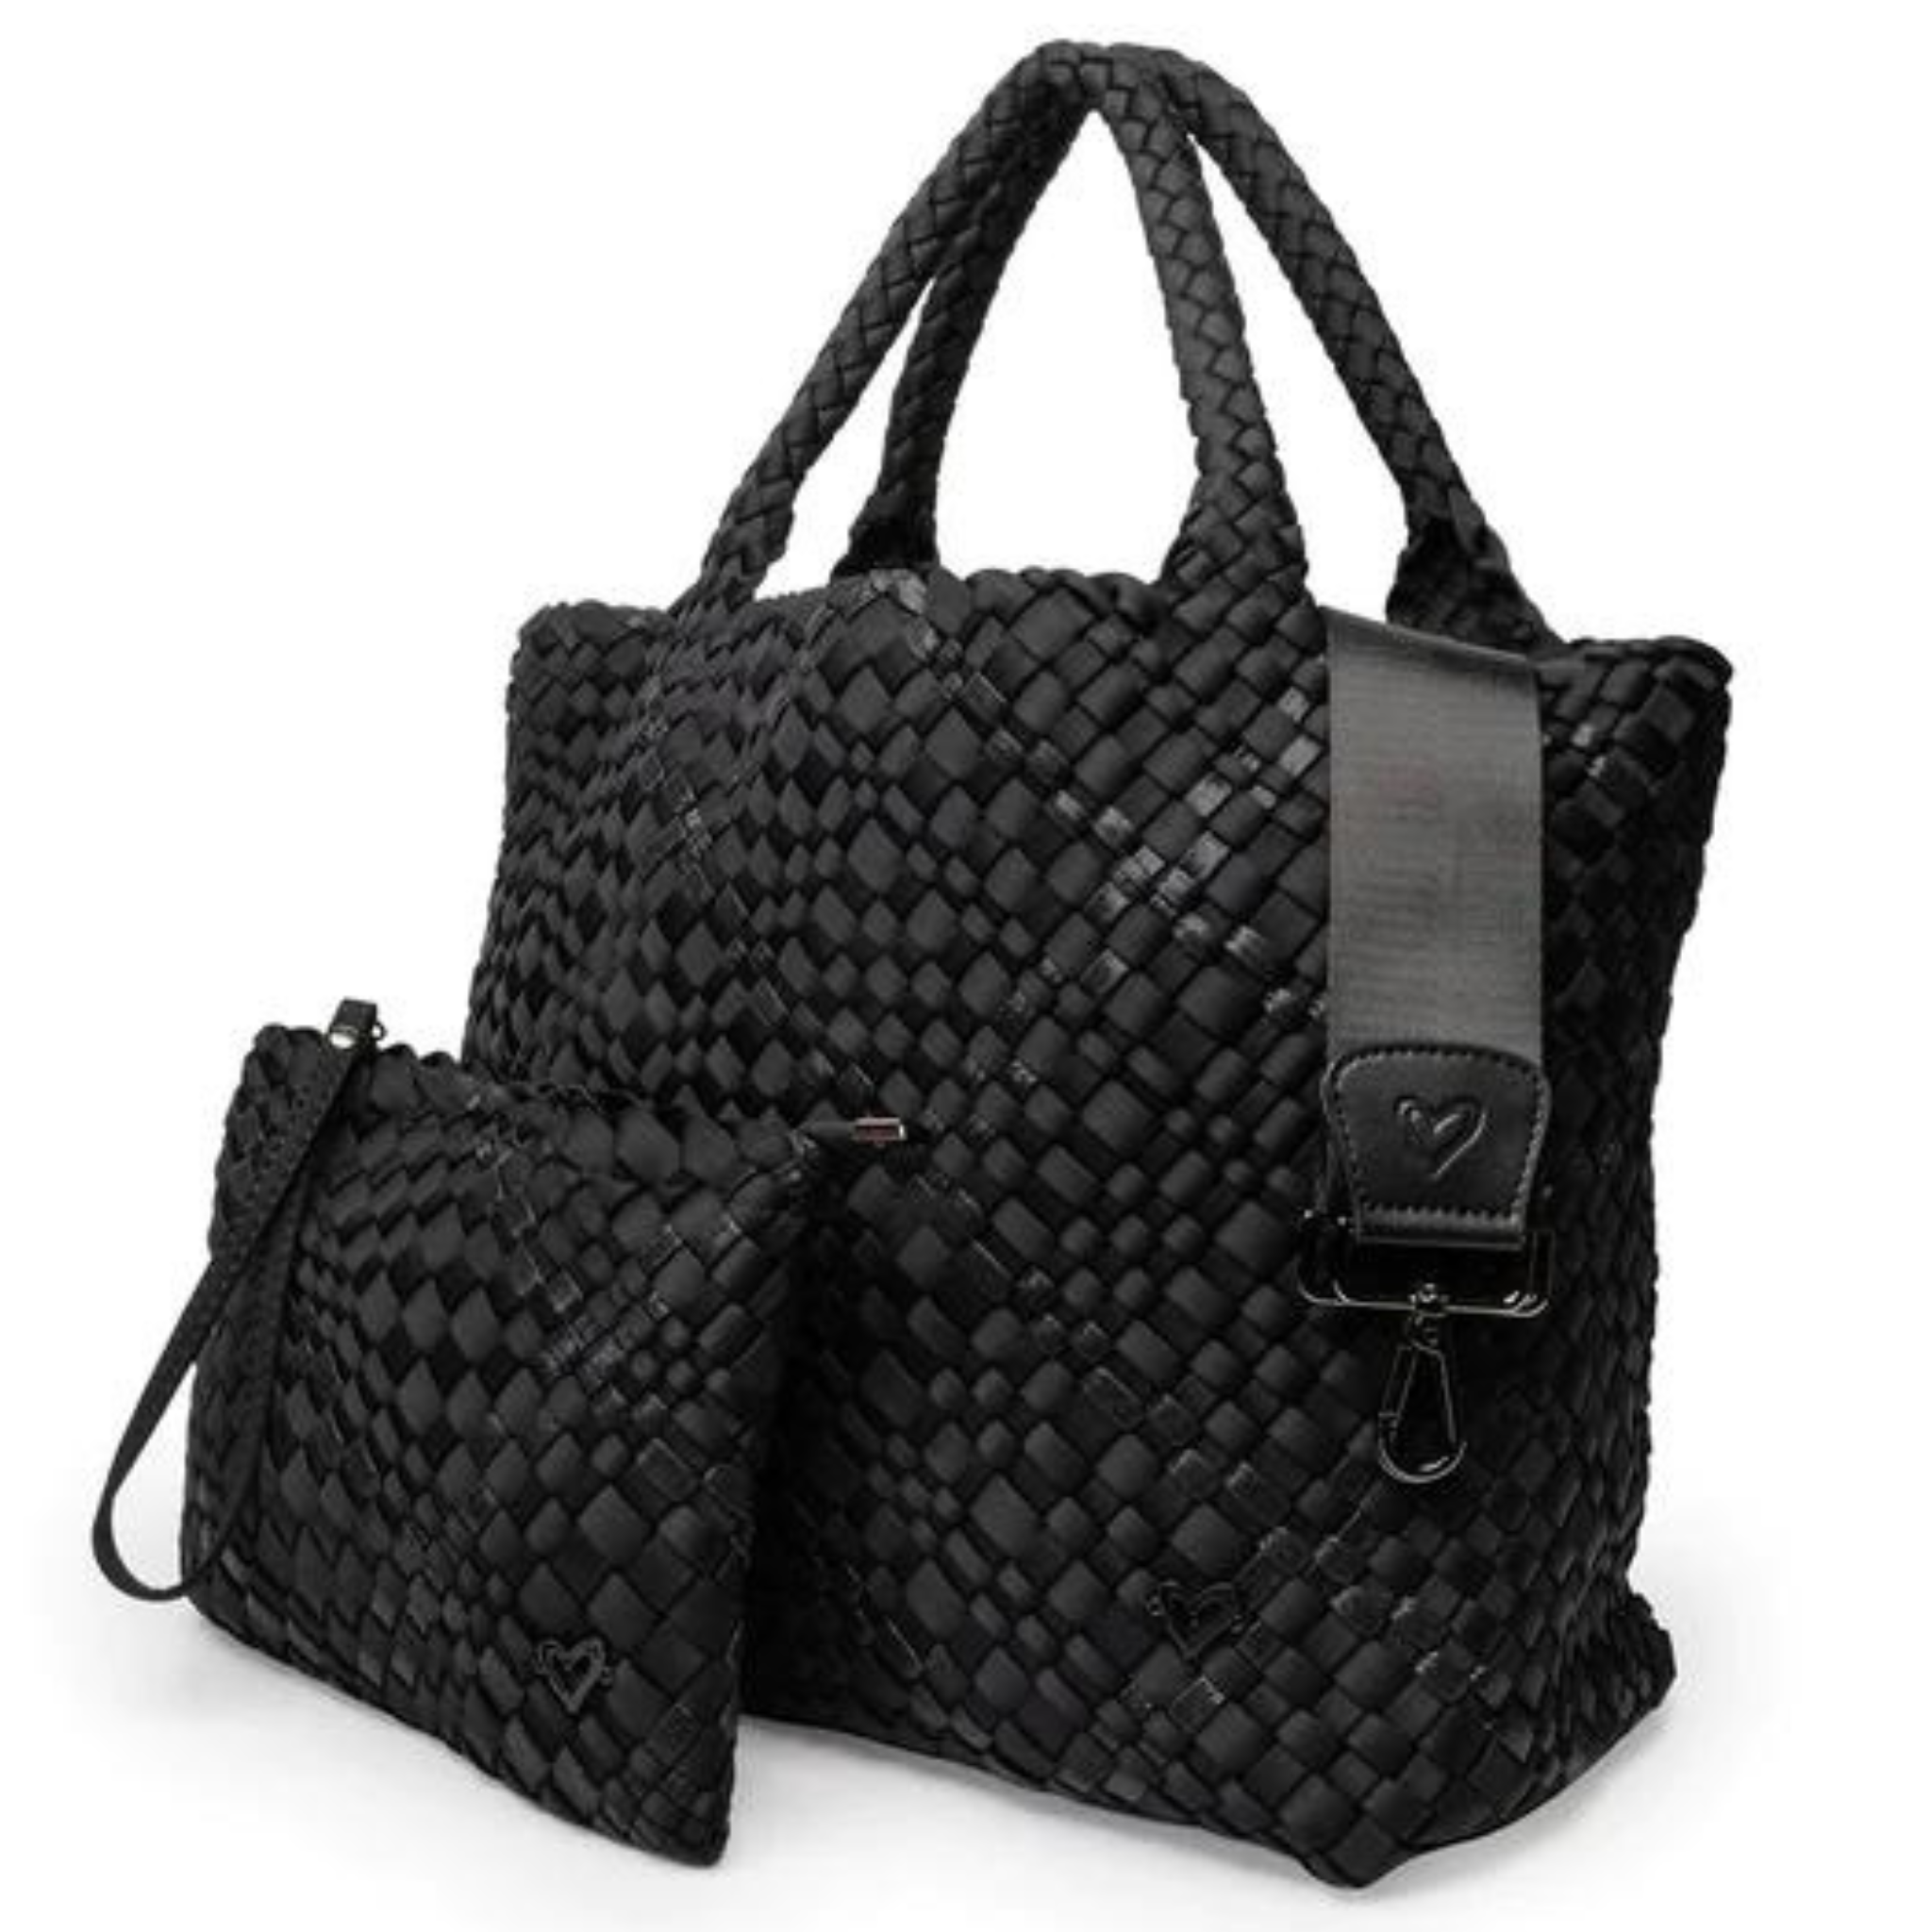 LONDON HAND-WOVEN LARGE TOTE